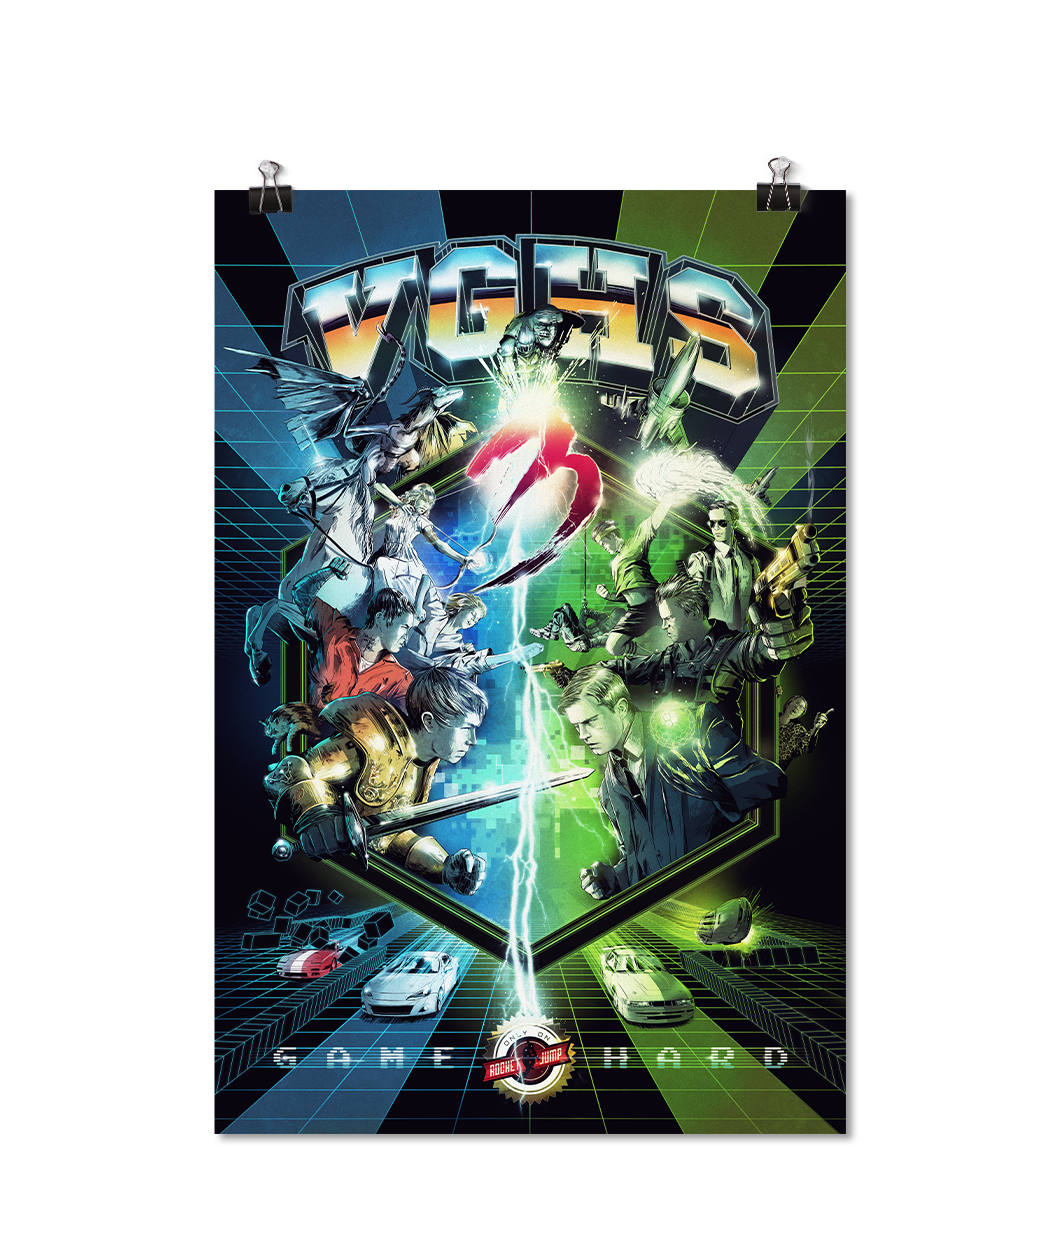 Movie size poster from season 3 of Video Game High School. One side is blue tone while the other is green tone, separated by a lighting bolt the characters face off in the middle of the poster with chrome lettering reflecting the desert spelling 